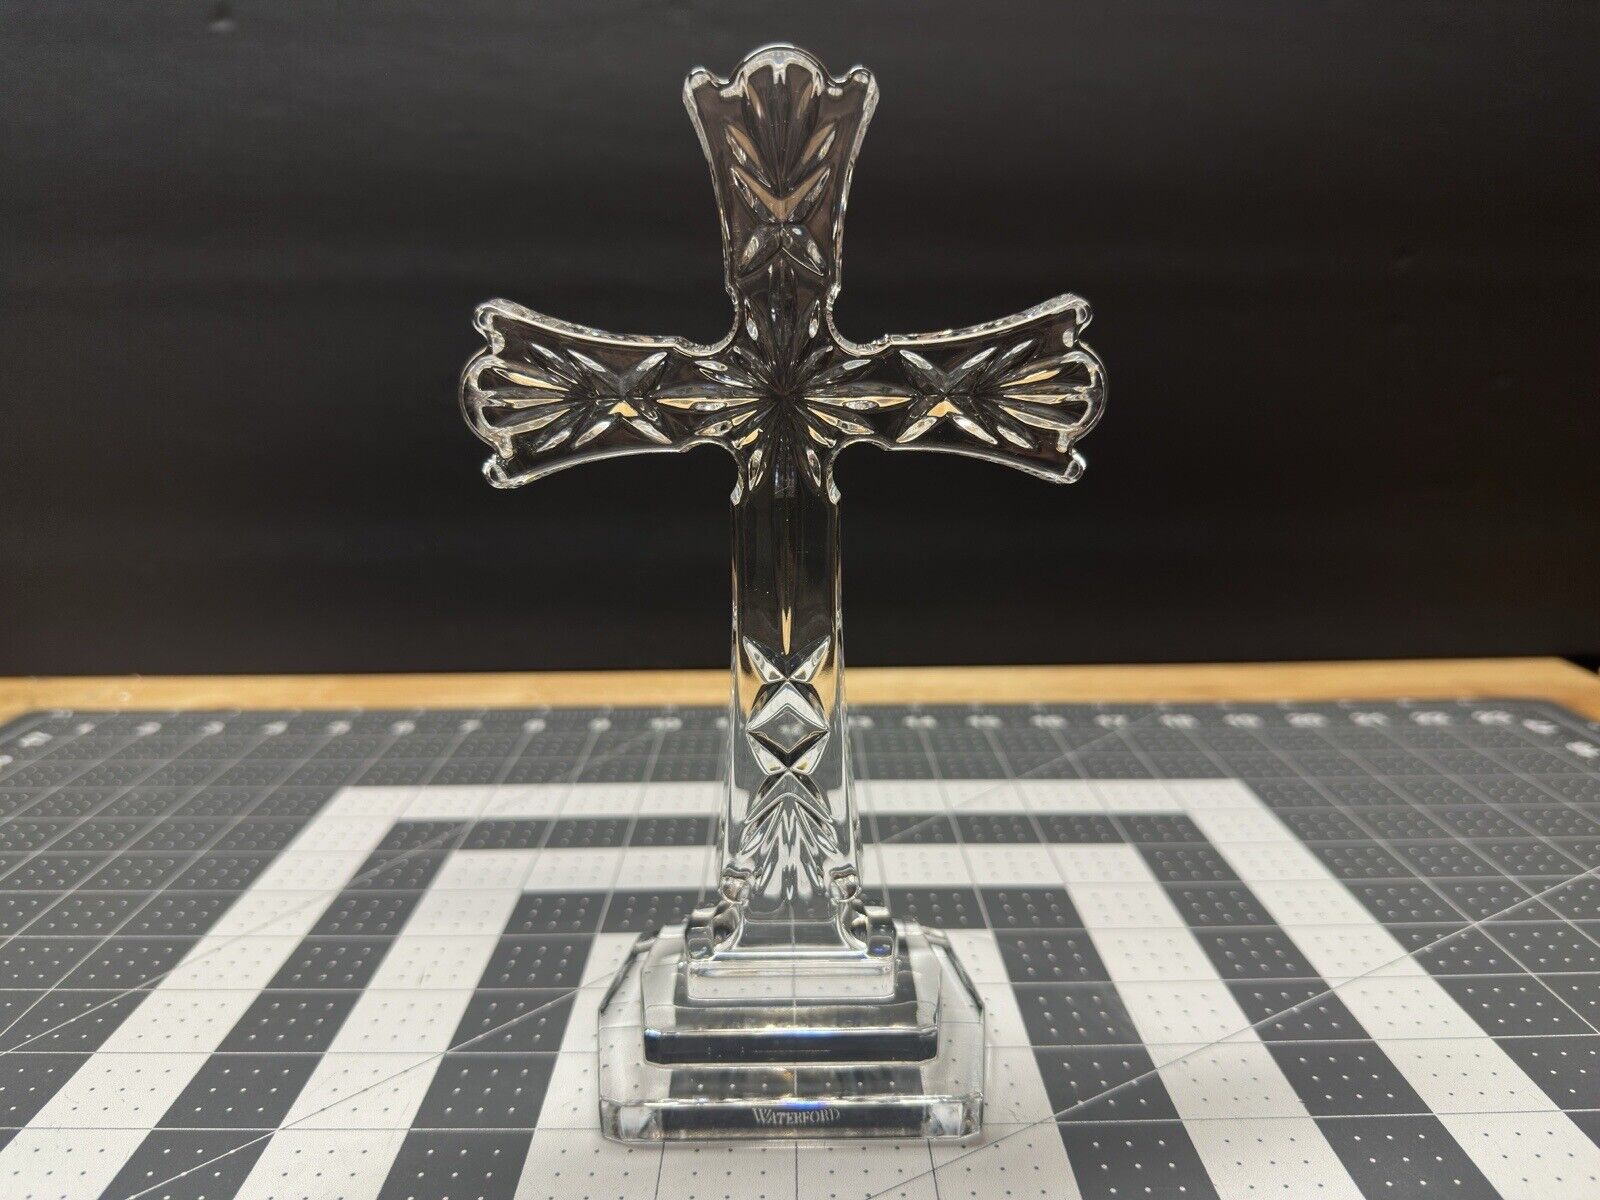 VTG WATERFORD CLEAR CRYSTAL 8 INCH STANDING CROSS RELIGIOUS JESUS CHRIST ETCHED